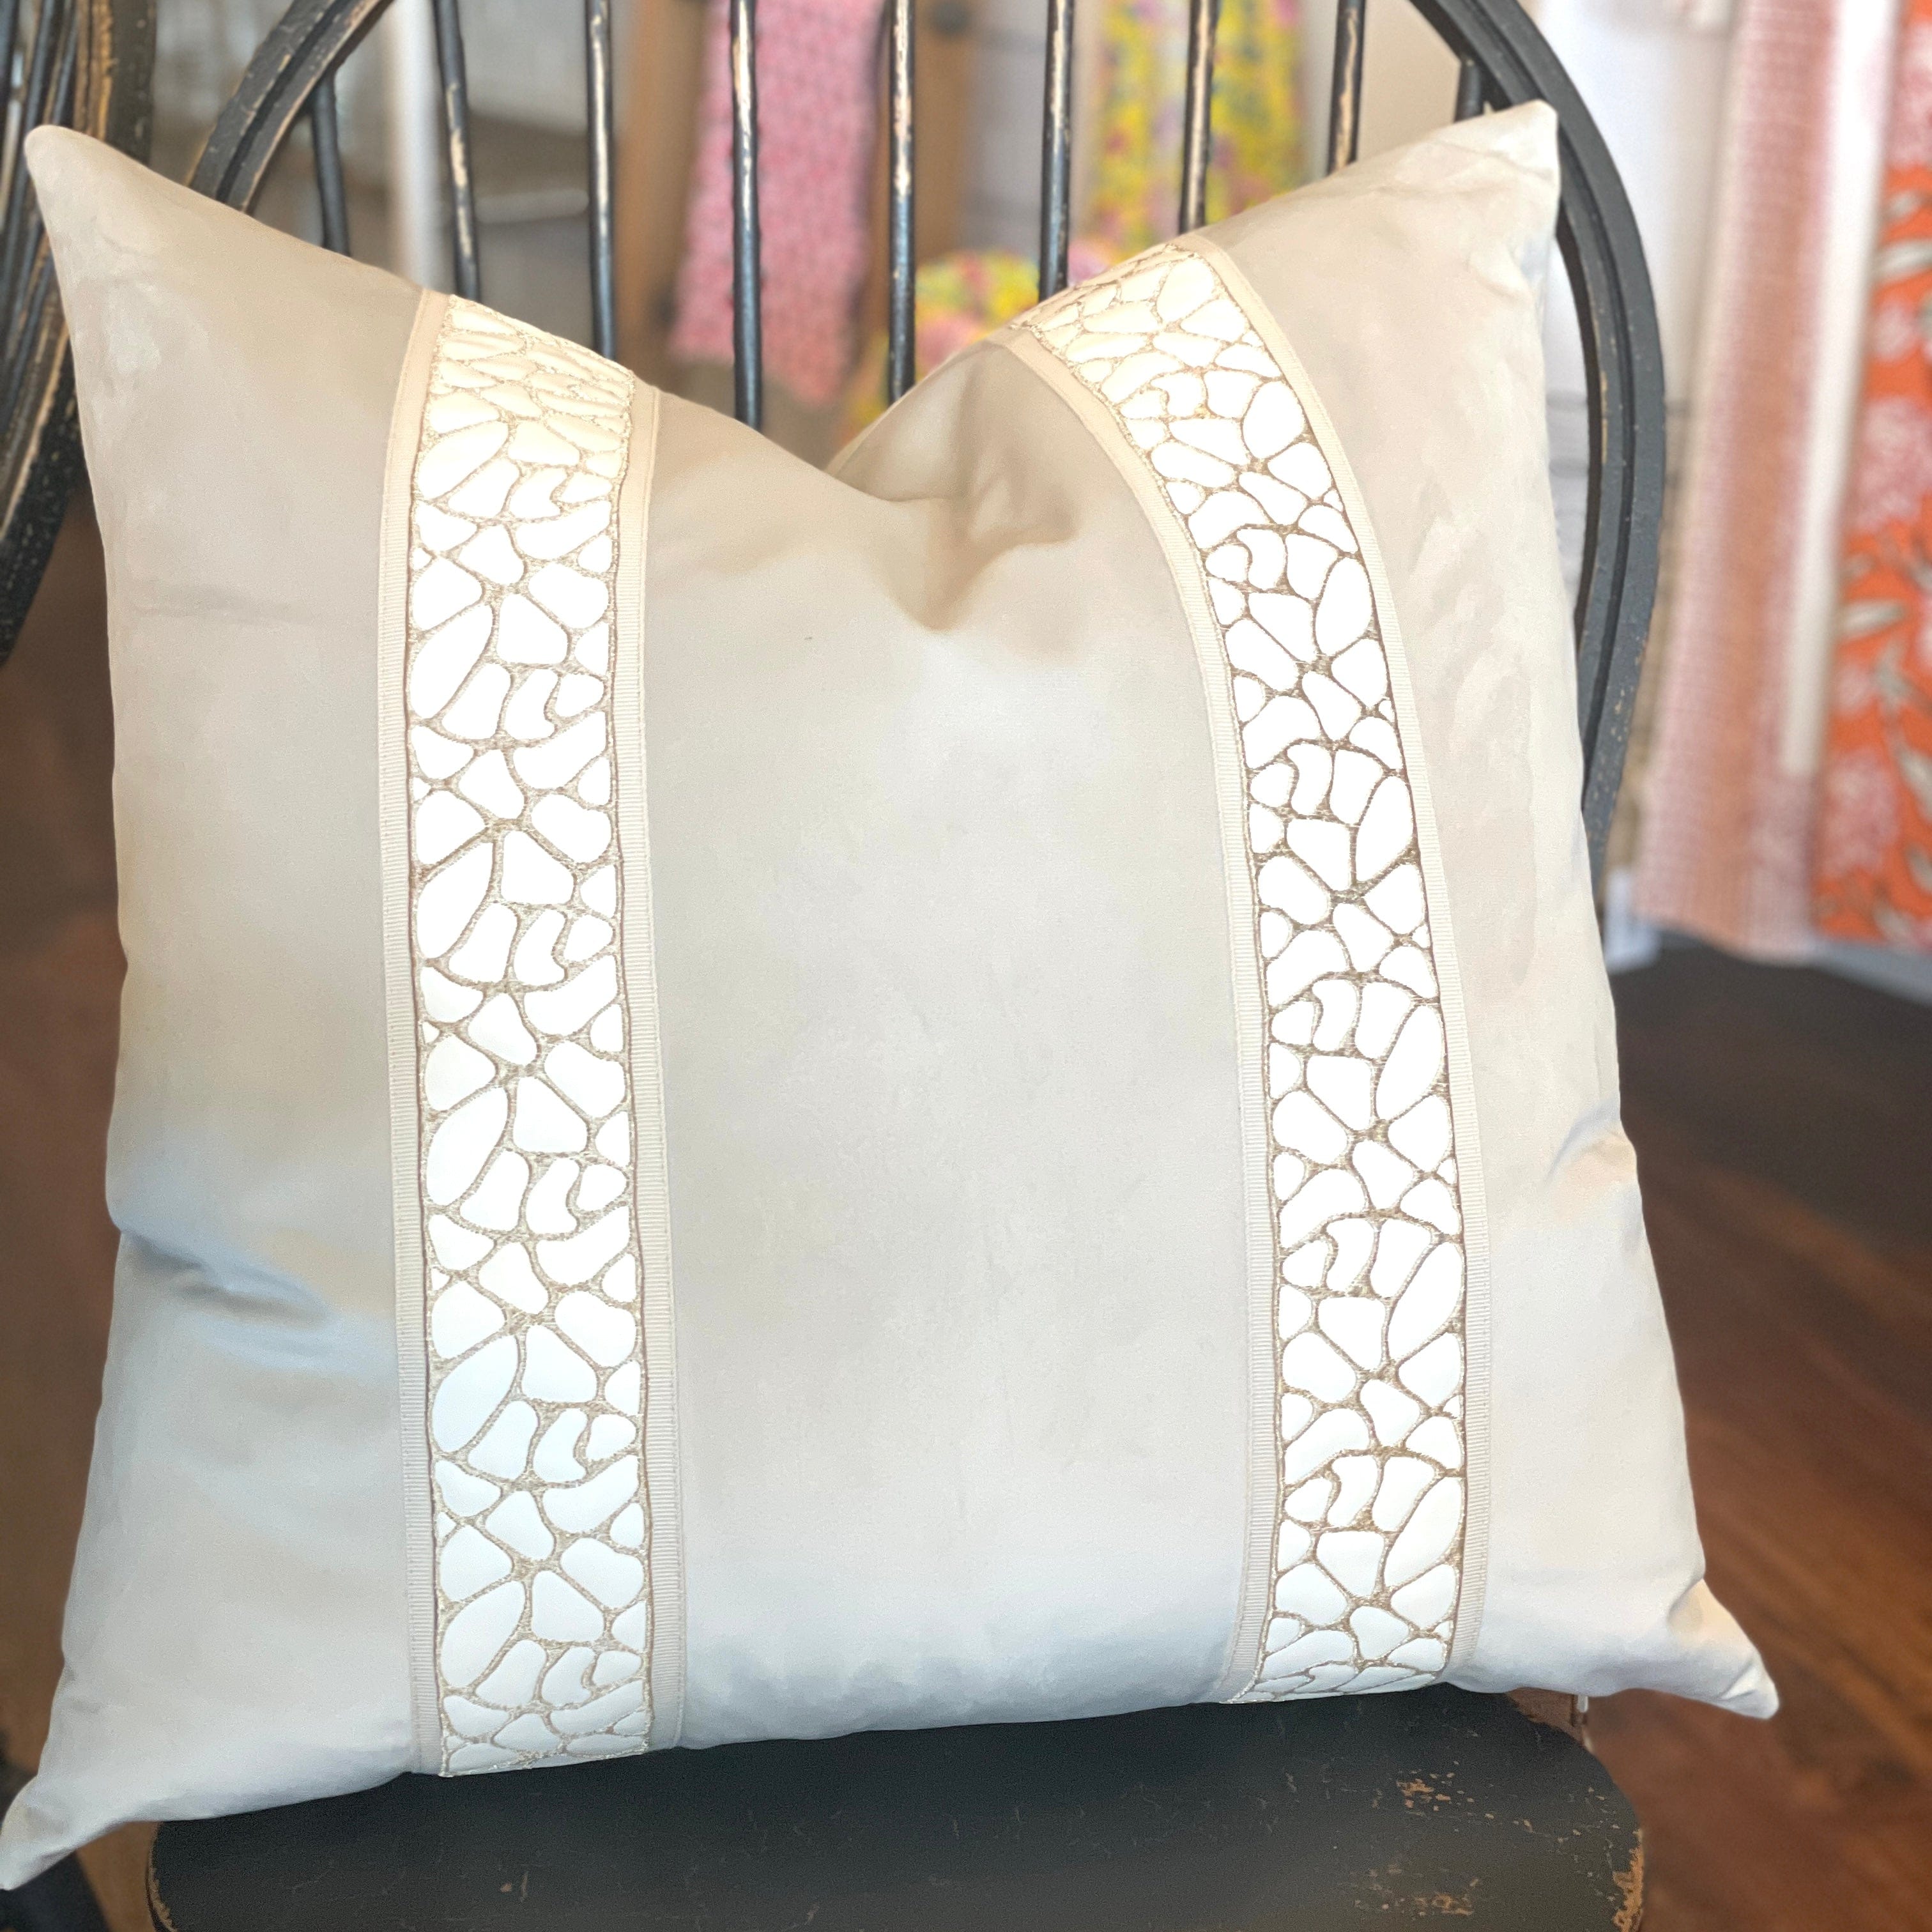 Lincoln Oyster Pillow - PORCH